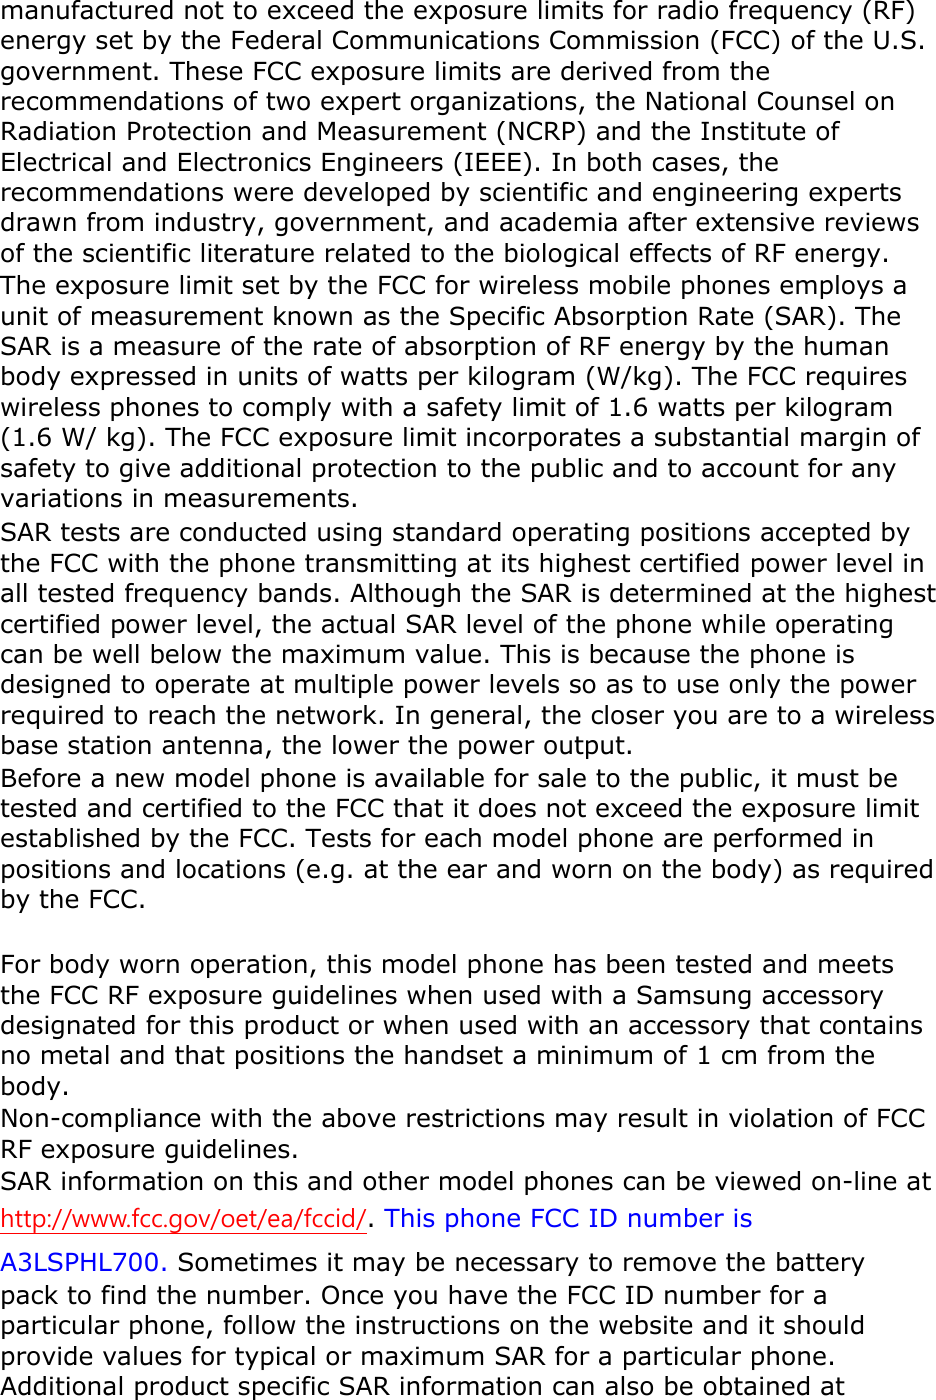 manufactured not to exceed the exposure limits for radio frequency (RF) energy set by the Federal Communications Commission (FCC) of the U.S. government. These FCC exposure limits are derived from the recommendations of two expert organizations, the National Counsel on Radiation Protection and Measurement (NCRP) and the Institute of Electrical and Electronics Engineers (IEEE). In both cases, the recommendations were developed by scientific and engineering experts drawn from industry, government, and academia after extensive reviews of the scientific literature related to the biological effects of RF energy. The exposure limit set by the FCC for wireless mobile phones employs a unit of measurement known as the Specific Absorption Rate (SAR). The SAR is a measure of the rate of absorption of RF energy by the human body expressed in units of watts per kilogram (W/kg). The FCC requires wireless phones to comply with a safety limit of 1.6 watts per kilogram (1.6 W/ kg). The FCC exposure limit incorporates a substantial margin of safety to give additional protection to the public and to account for any variations in measurements. SAR tests are conducted using standard operating positions accepted by the FCC with the phone transmitting at its highest certified power level in all tested frequency bands. Although the SAR is determined at the highest certified power level, the actual SAR level of the phone while operating can be well below the maximum value. This is because the phone is designed to operate at multiple power levels so as to use only the power required to reach the network. In general, the closer you are to a wireless base station antenna, the lower the power output. Before a new model phone is available for sale to the public, it must be tested and certified to the FCC that it does not exceed the exposure limit established by the FCC. Tests for each model phone are performed in positions and locations (e.g. at the ear and worn on the body) as required by the FCC.      For body worn operation, this model phone has been tested and meets the FCC RF exposure guidelines when used with a Samsung accessory designated for this product or when used with an accessory that contains no metal and that positions the handset a minimum of 1 cm from the body.   Non-compliance with the above restrictions may result in violation of FCC RF exposure guidelines. SAR information on this and other model phones can be viewed on-line at http://www.fcc.gov/oet/ea/fccid/. This phone FCC ID number isA3LSPHL700. Sometimes it may be necessary to remove the battery pack to find the number. Once you have the FCC ID number for a particular phone, follow the instructions on the website and it should provide values for typical or maximum SAR for a particular phone. Additional product specific SAR information can also be obtained at 